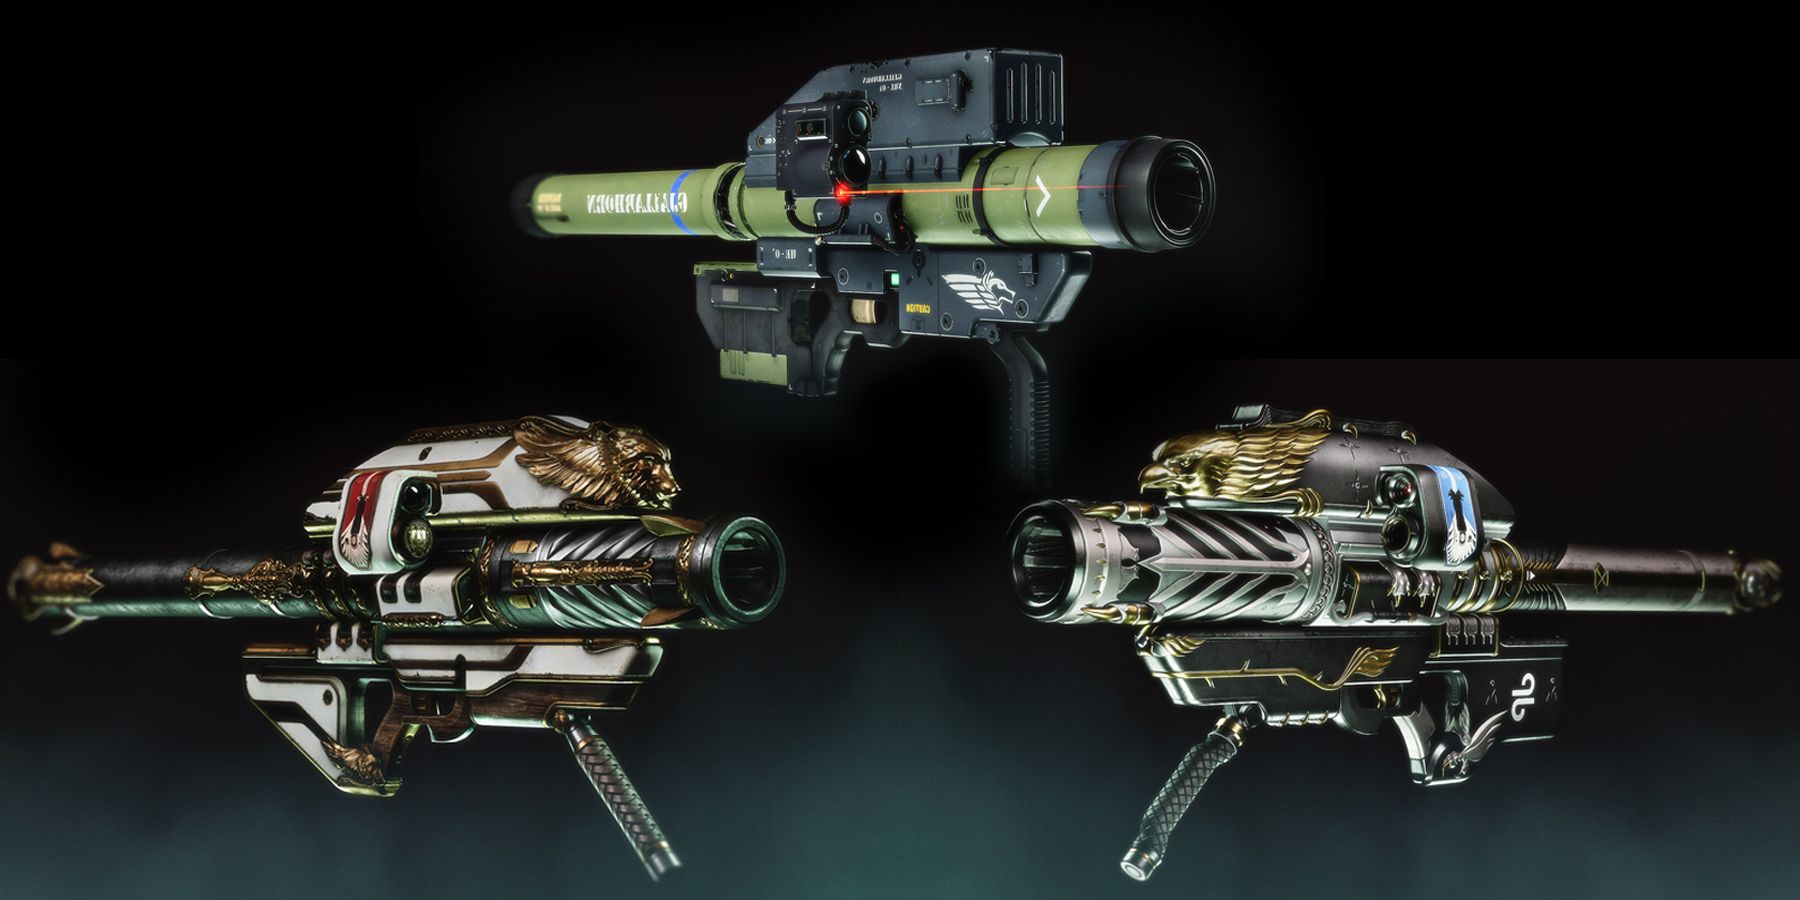 The exotic rocket launcher Gjallarhorn and its two ornaments from Destiny 2.